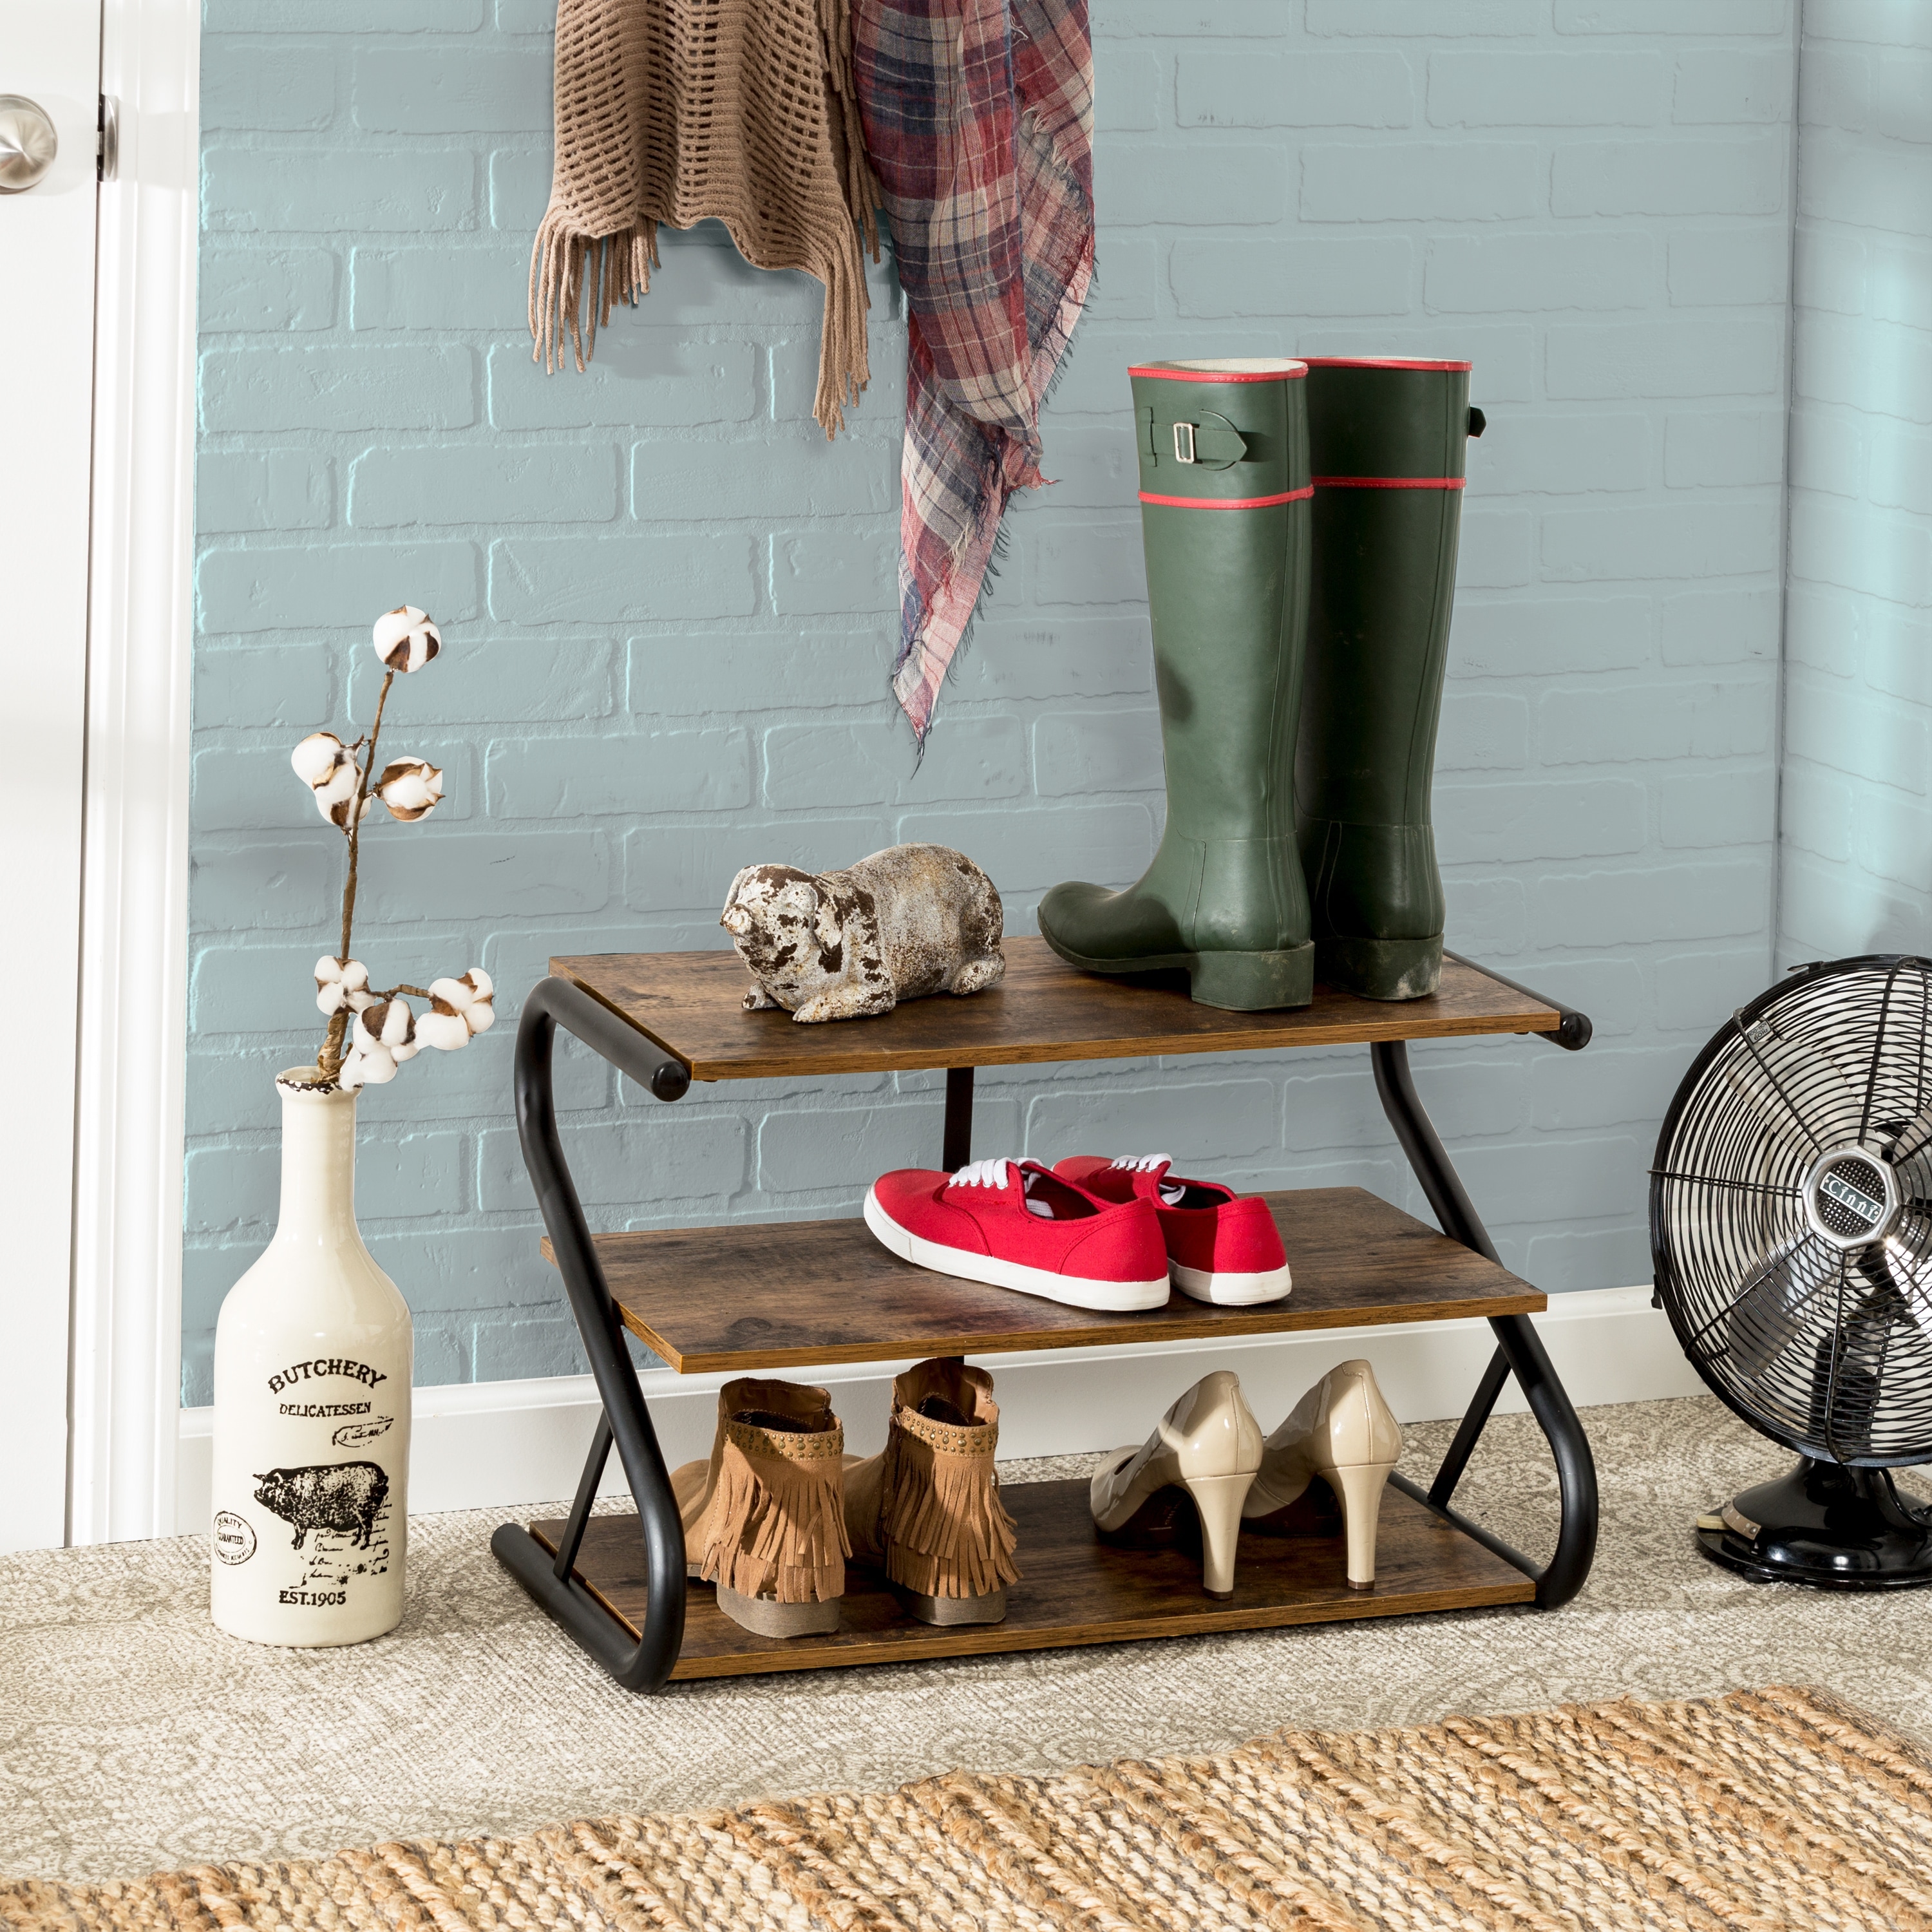 https://ak1.ostkcdn.com/images/products/is/images/direct/75dc59593421eb6efc8c14793ad107cf4fcfe5a2/Rustic-Z-Frame-3-Level-Shoe-Rack.jpg